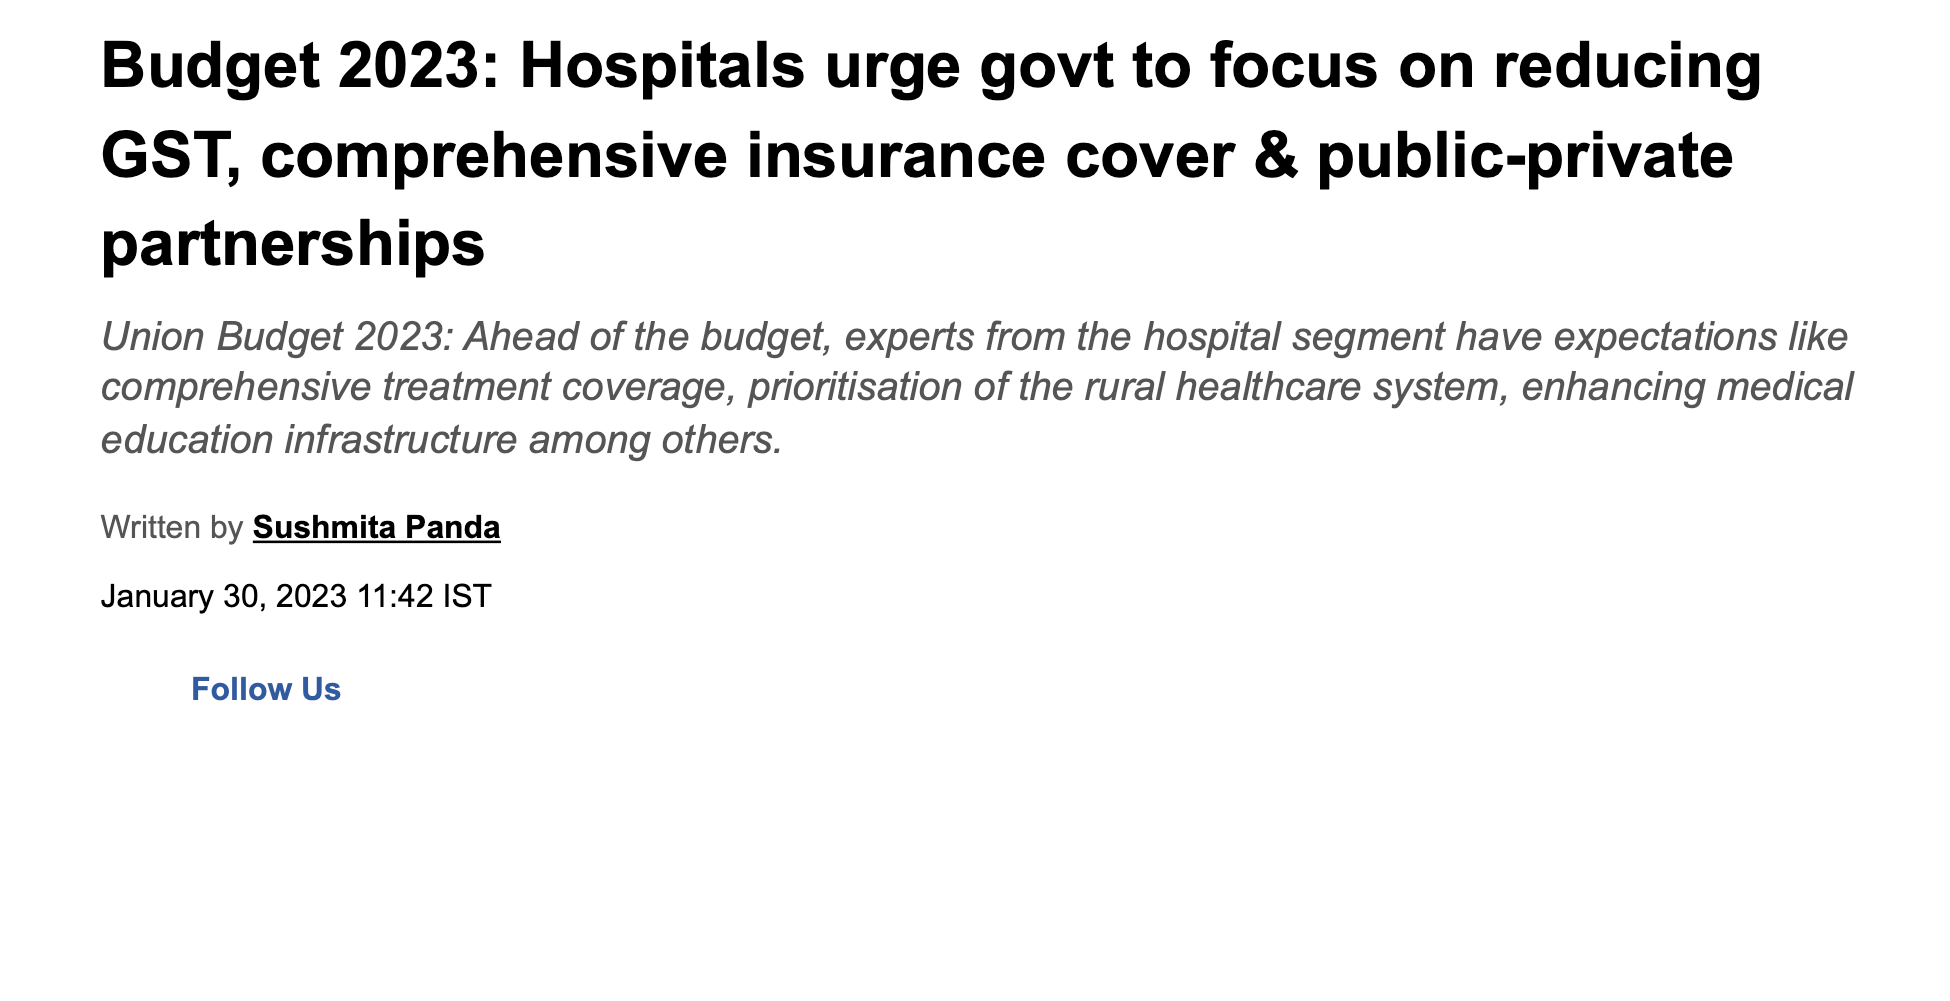 Budget 2023: Hospitals urge govt to focus on reducing GST, comprehensive insurance cover & public-private partnerships